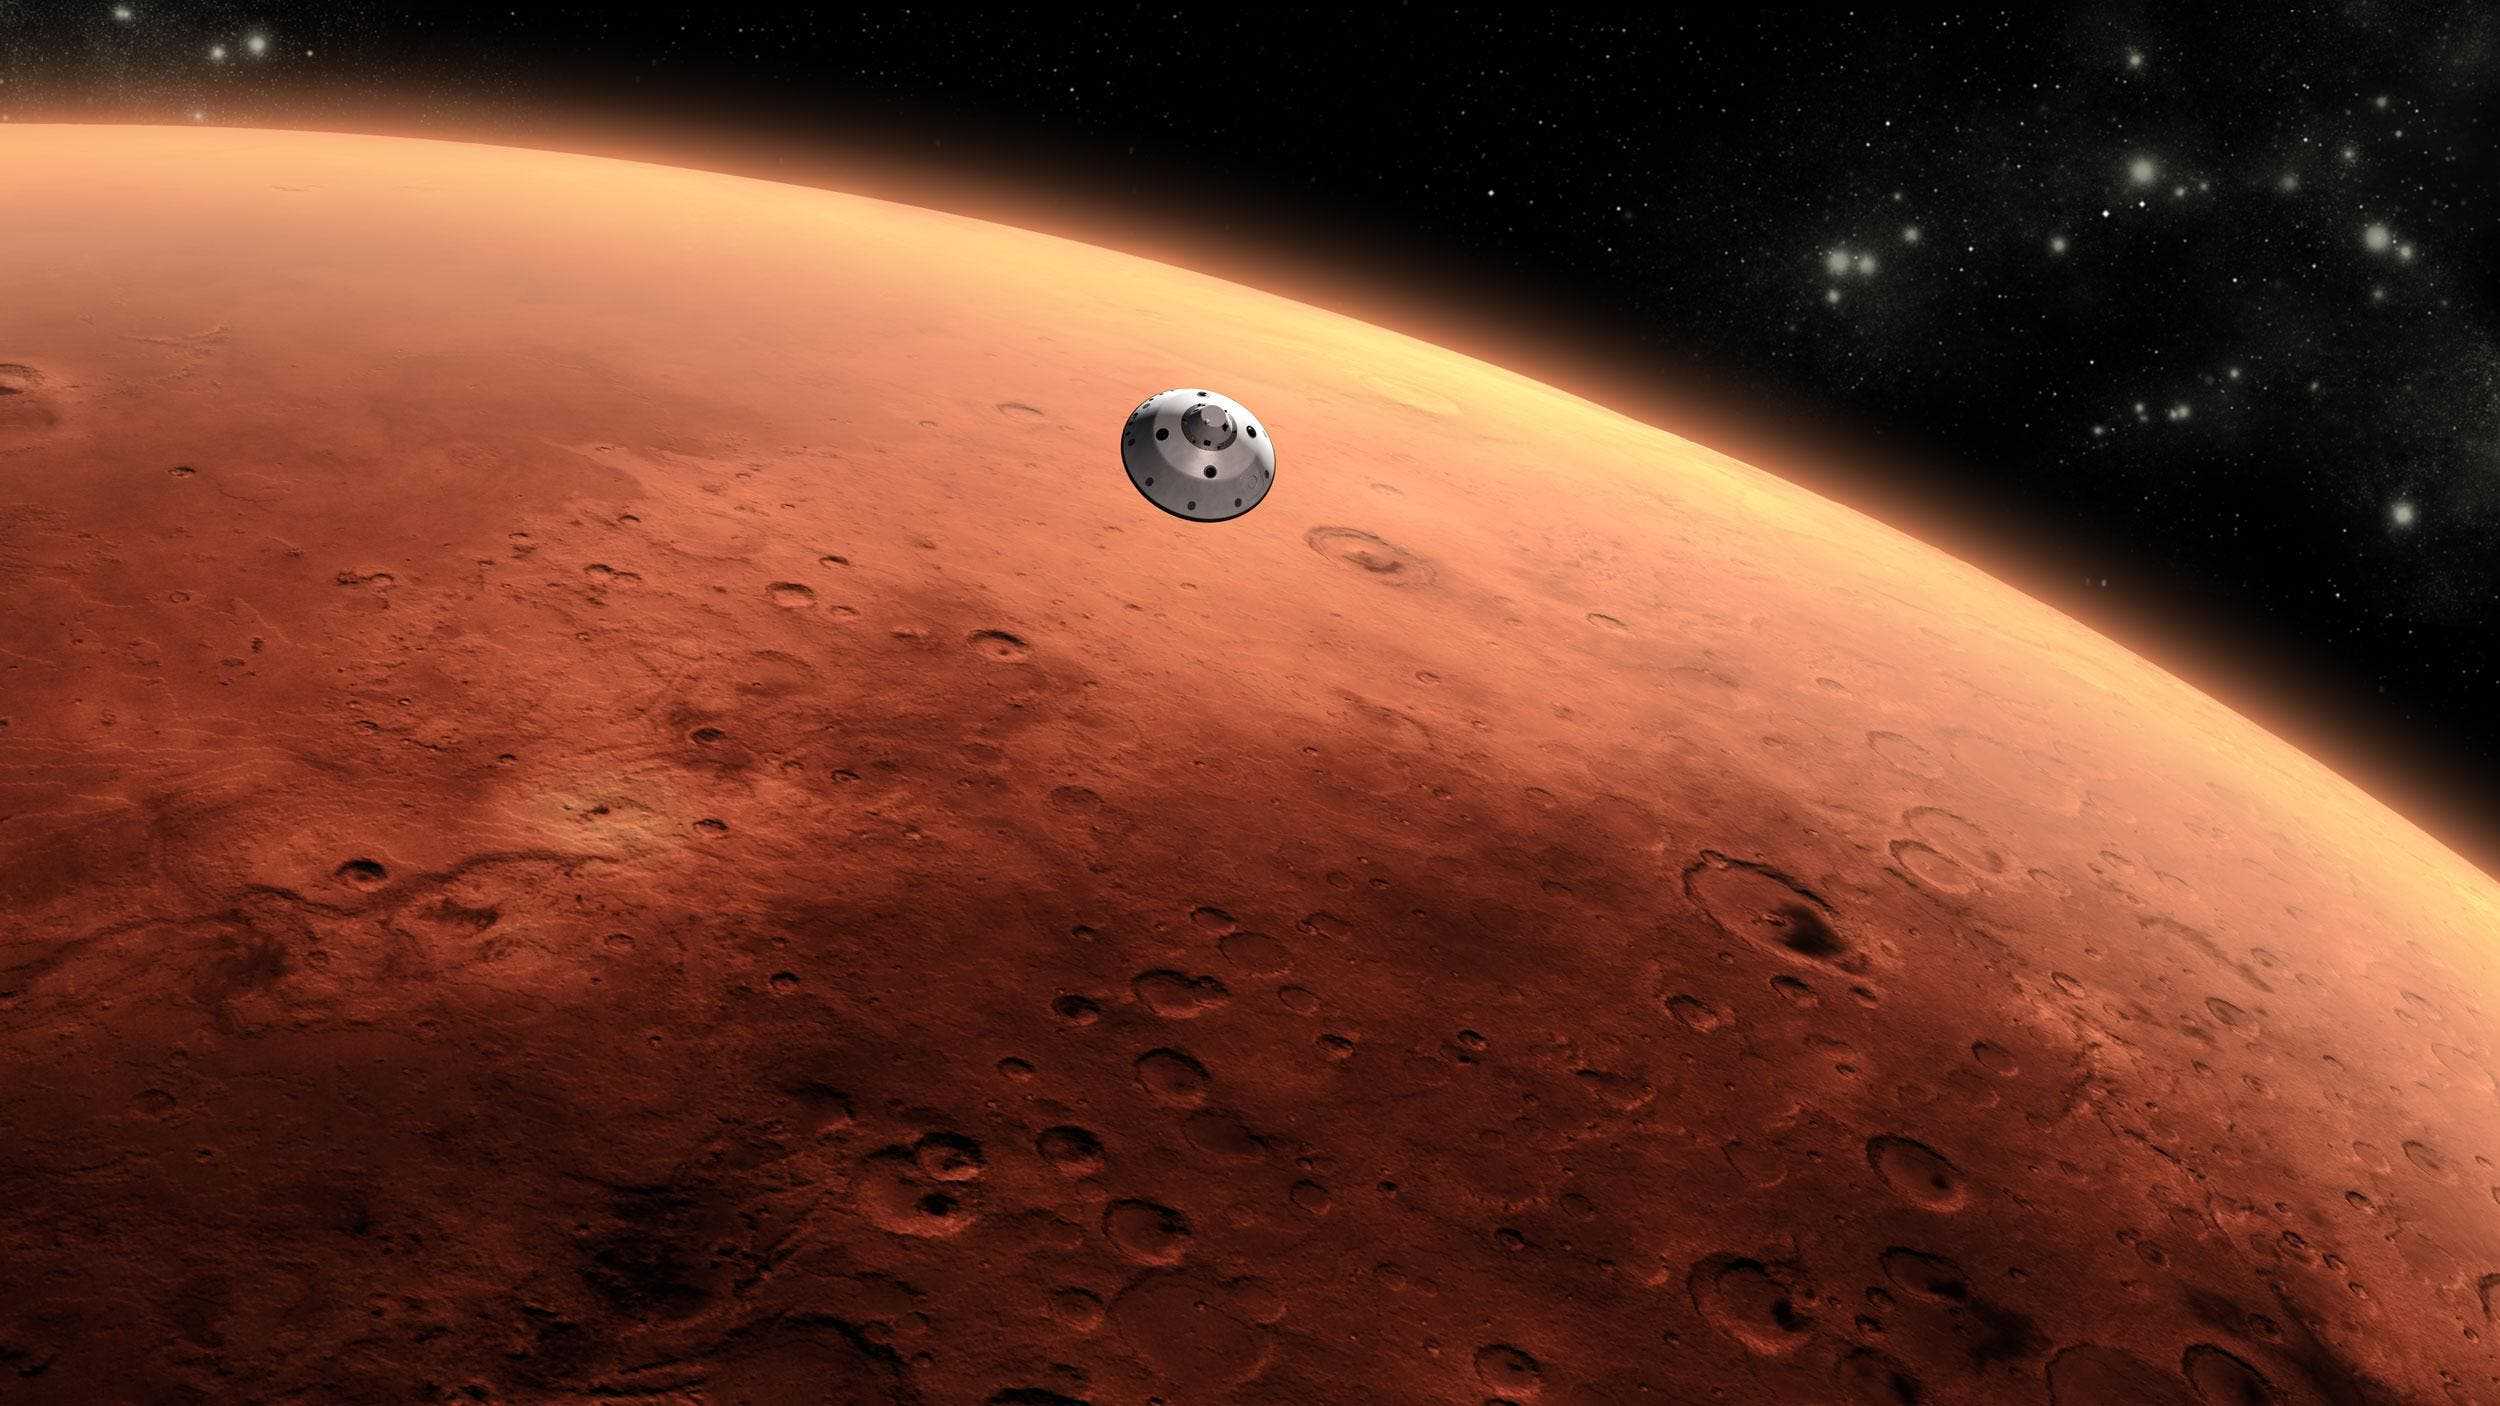 Artist's concept of the Mars Science Laboratory spacecraft approaching the Red Planet. Image credit: NASA/JPL-Caltech.